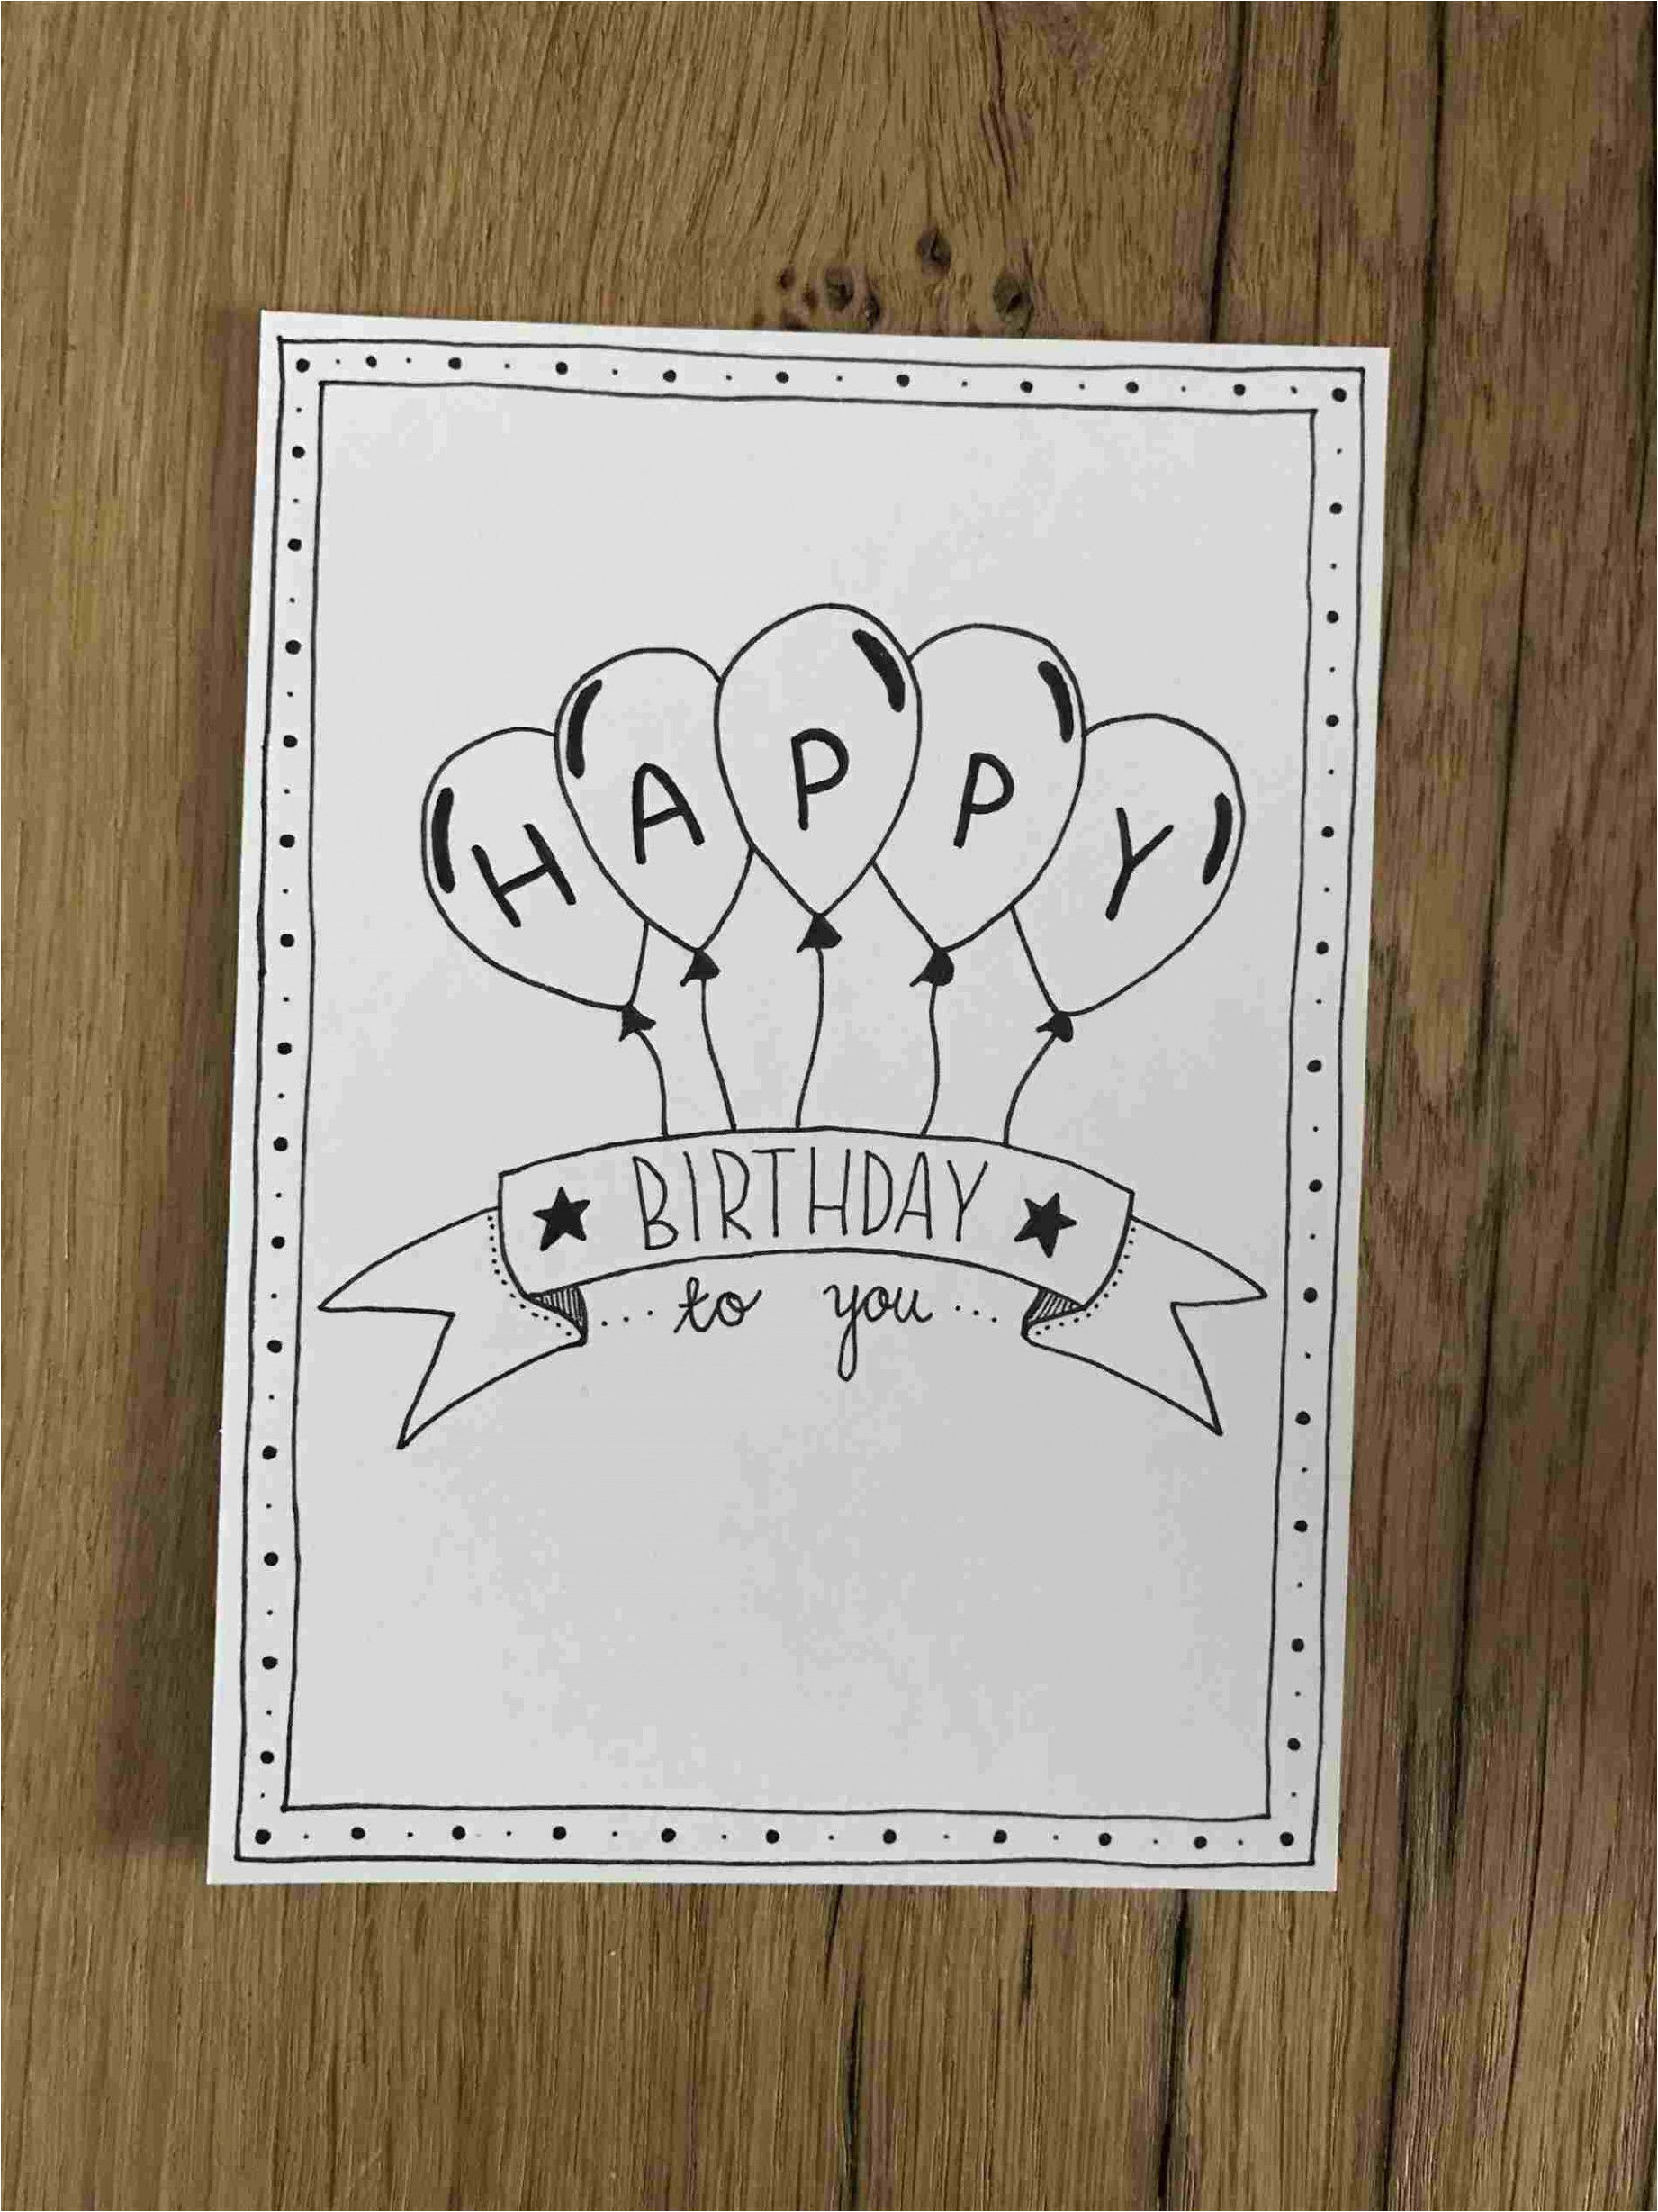 Happy Birthday Card Easy and Simple How to Draw A Happy Birthday Card Inspiration In